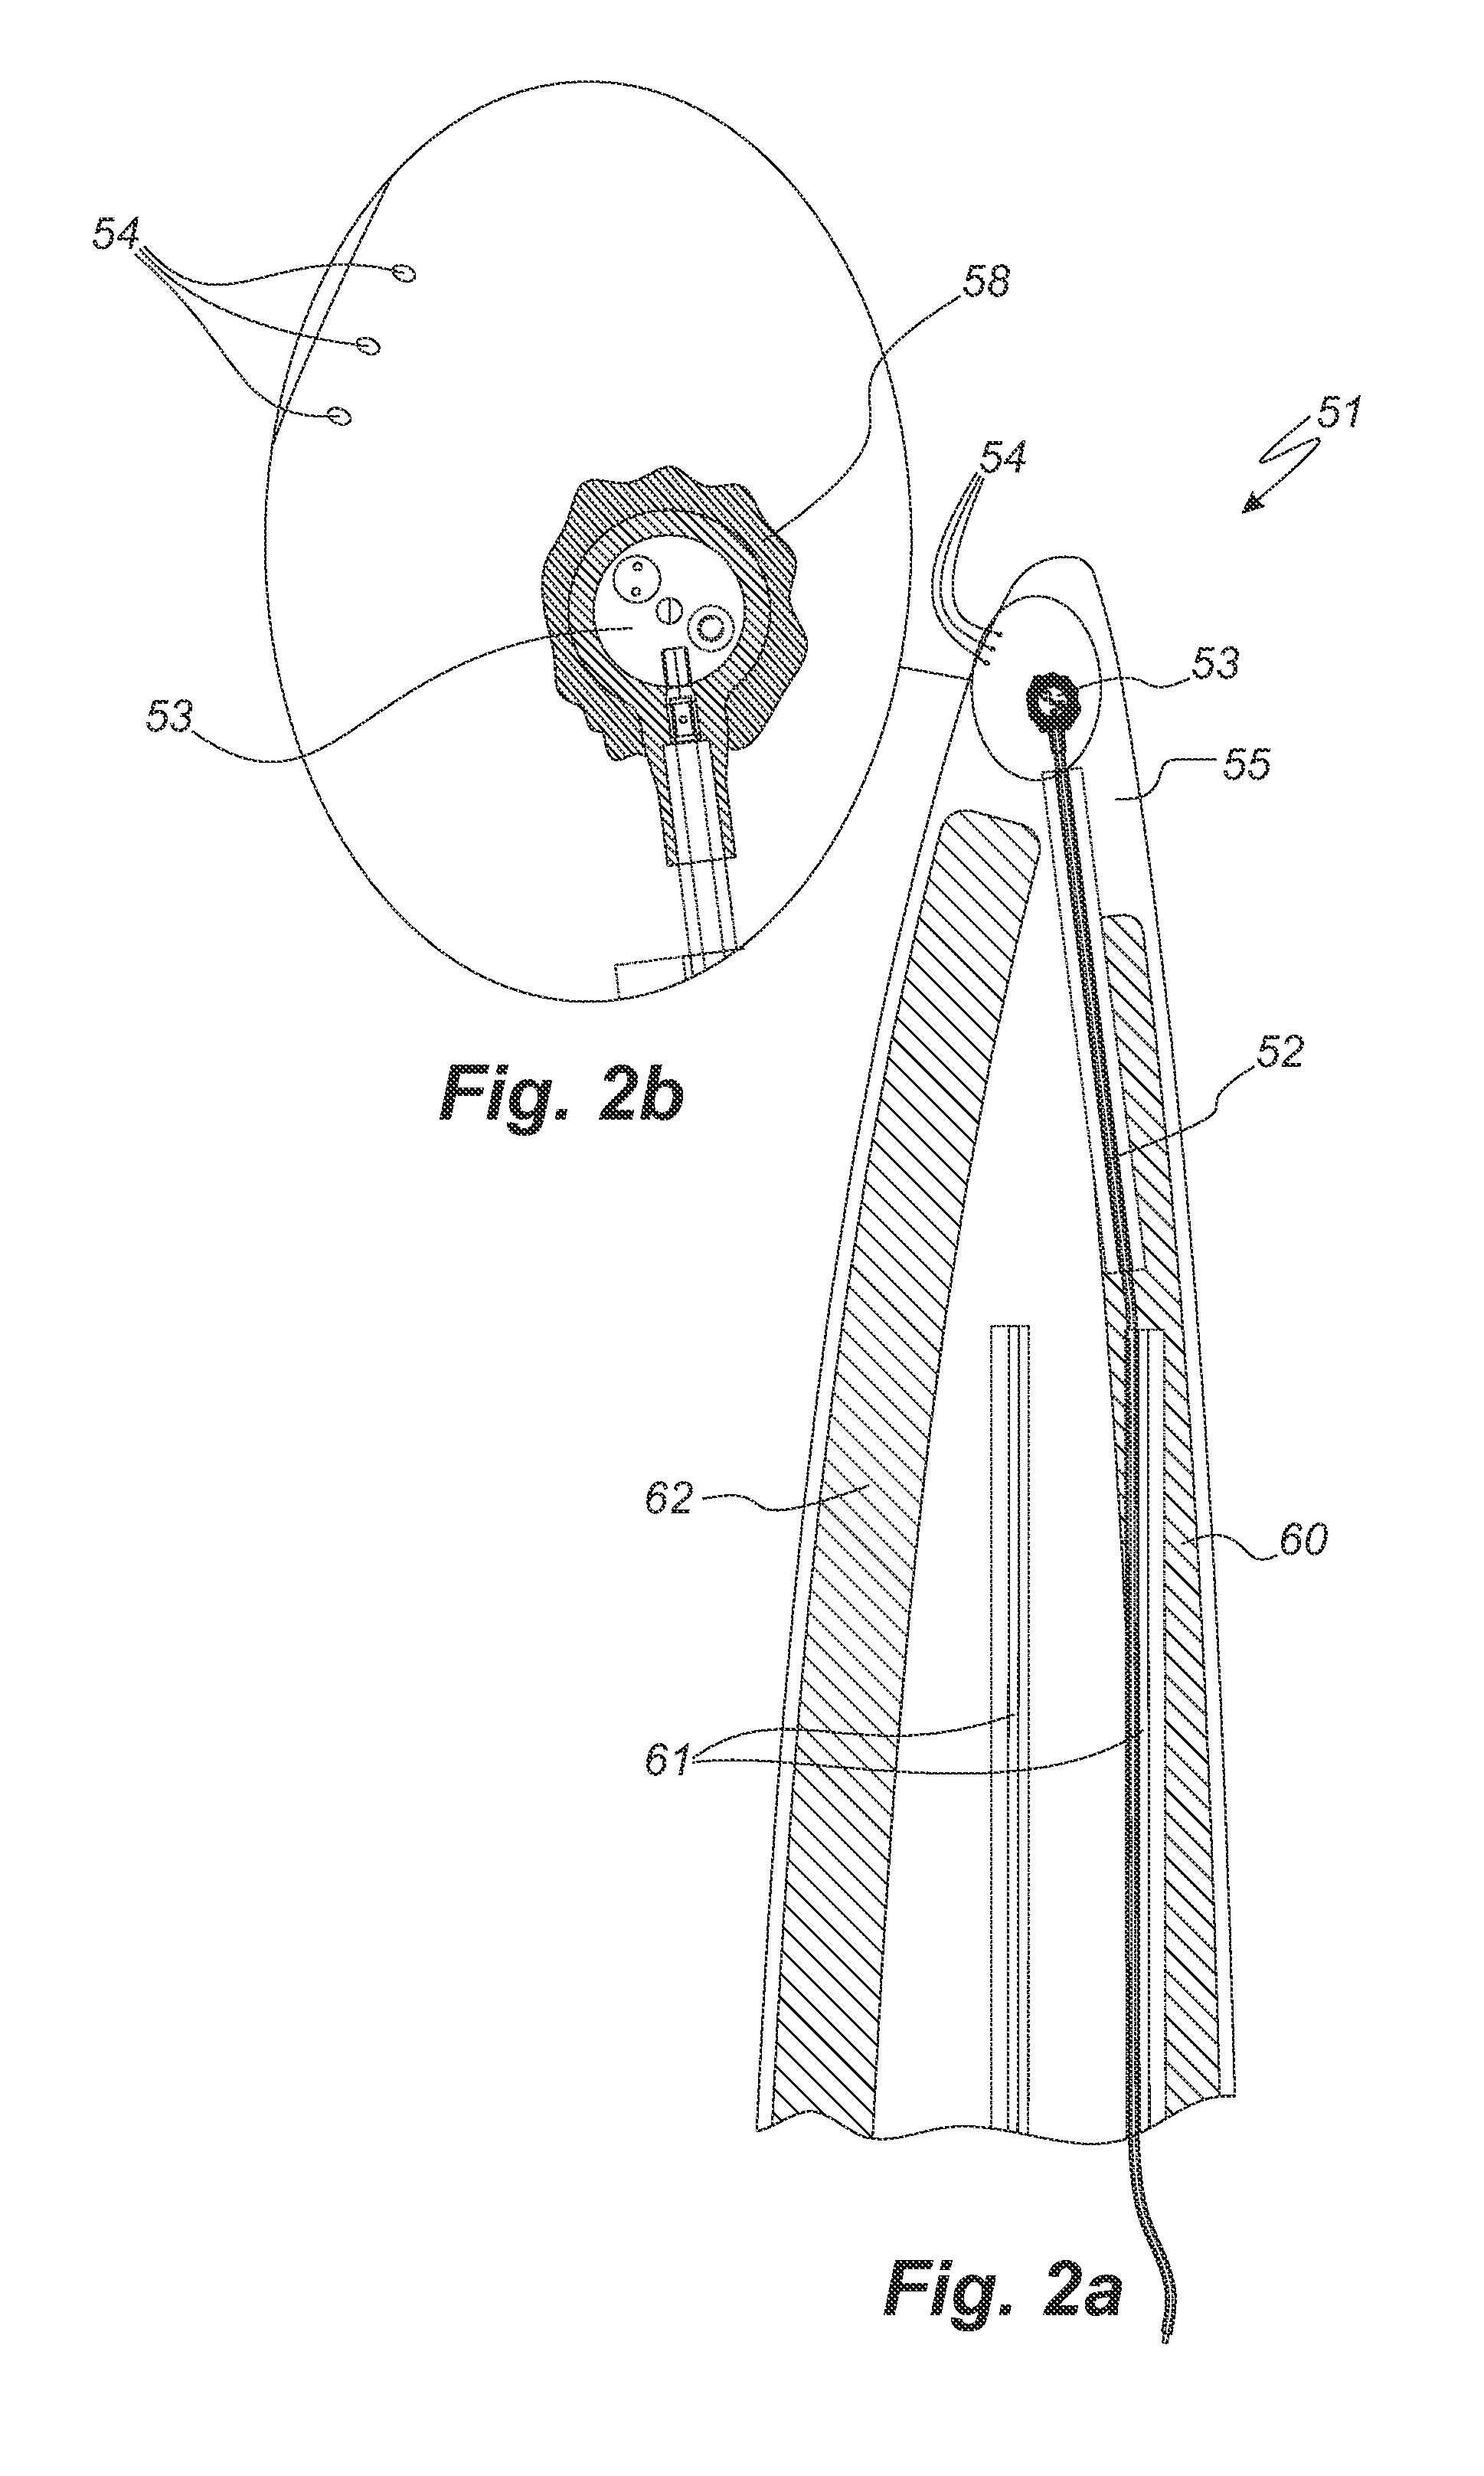 Wind turbine blade with a lightning protection system